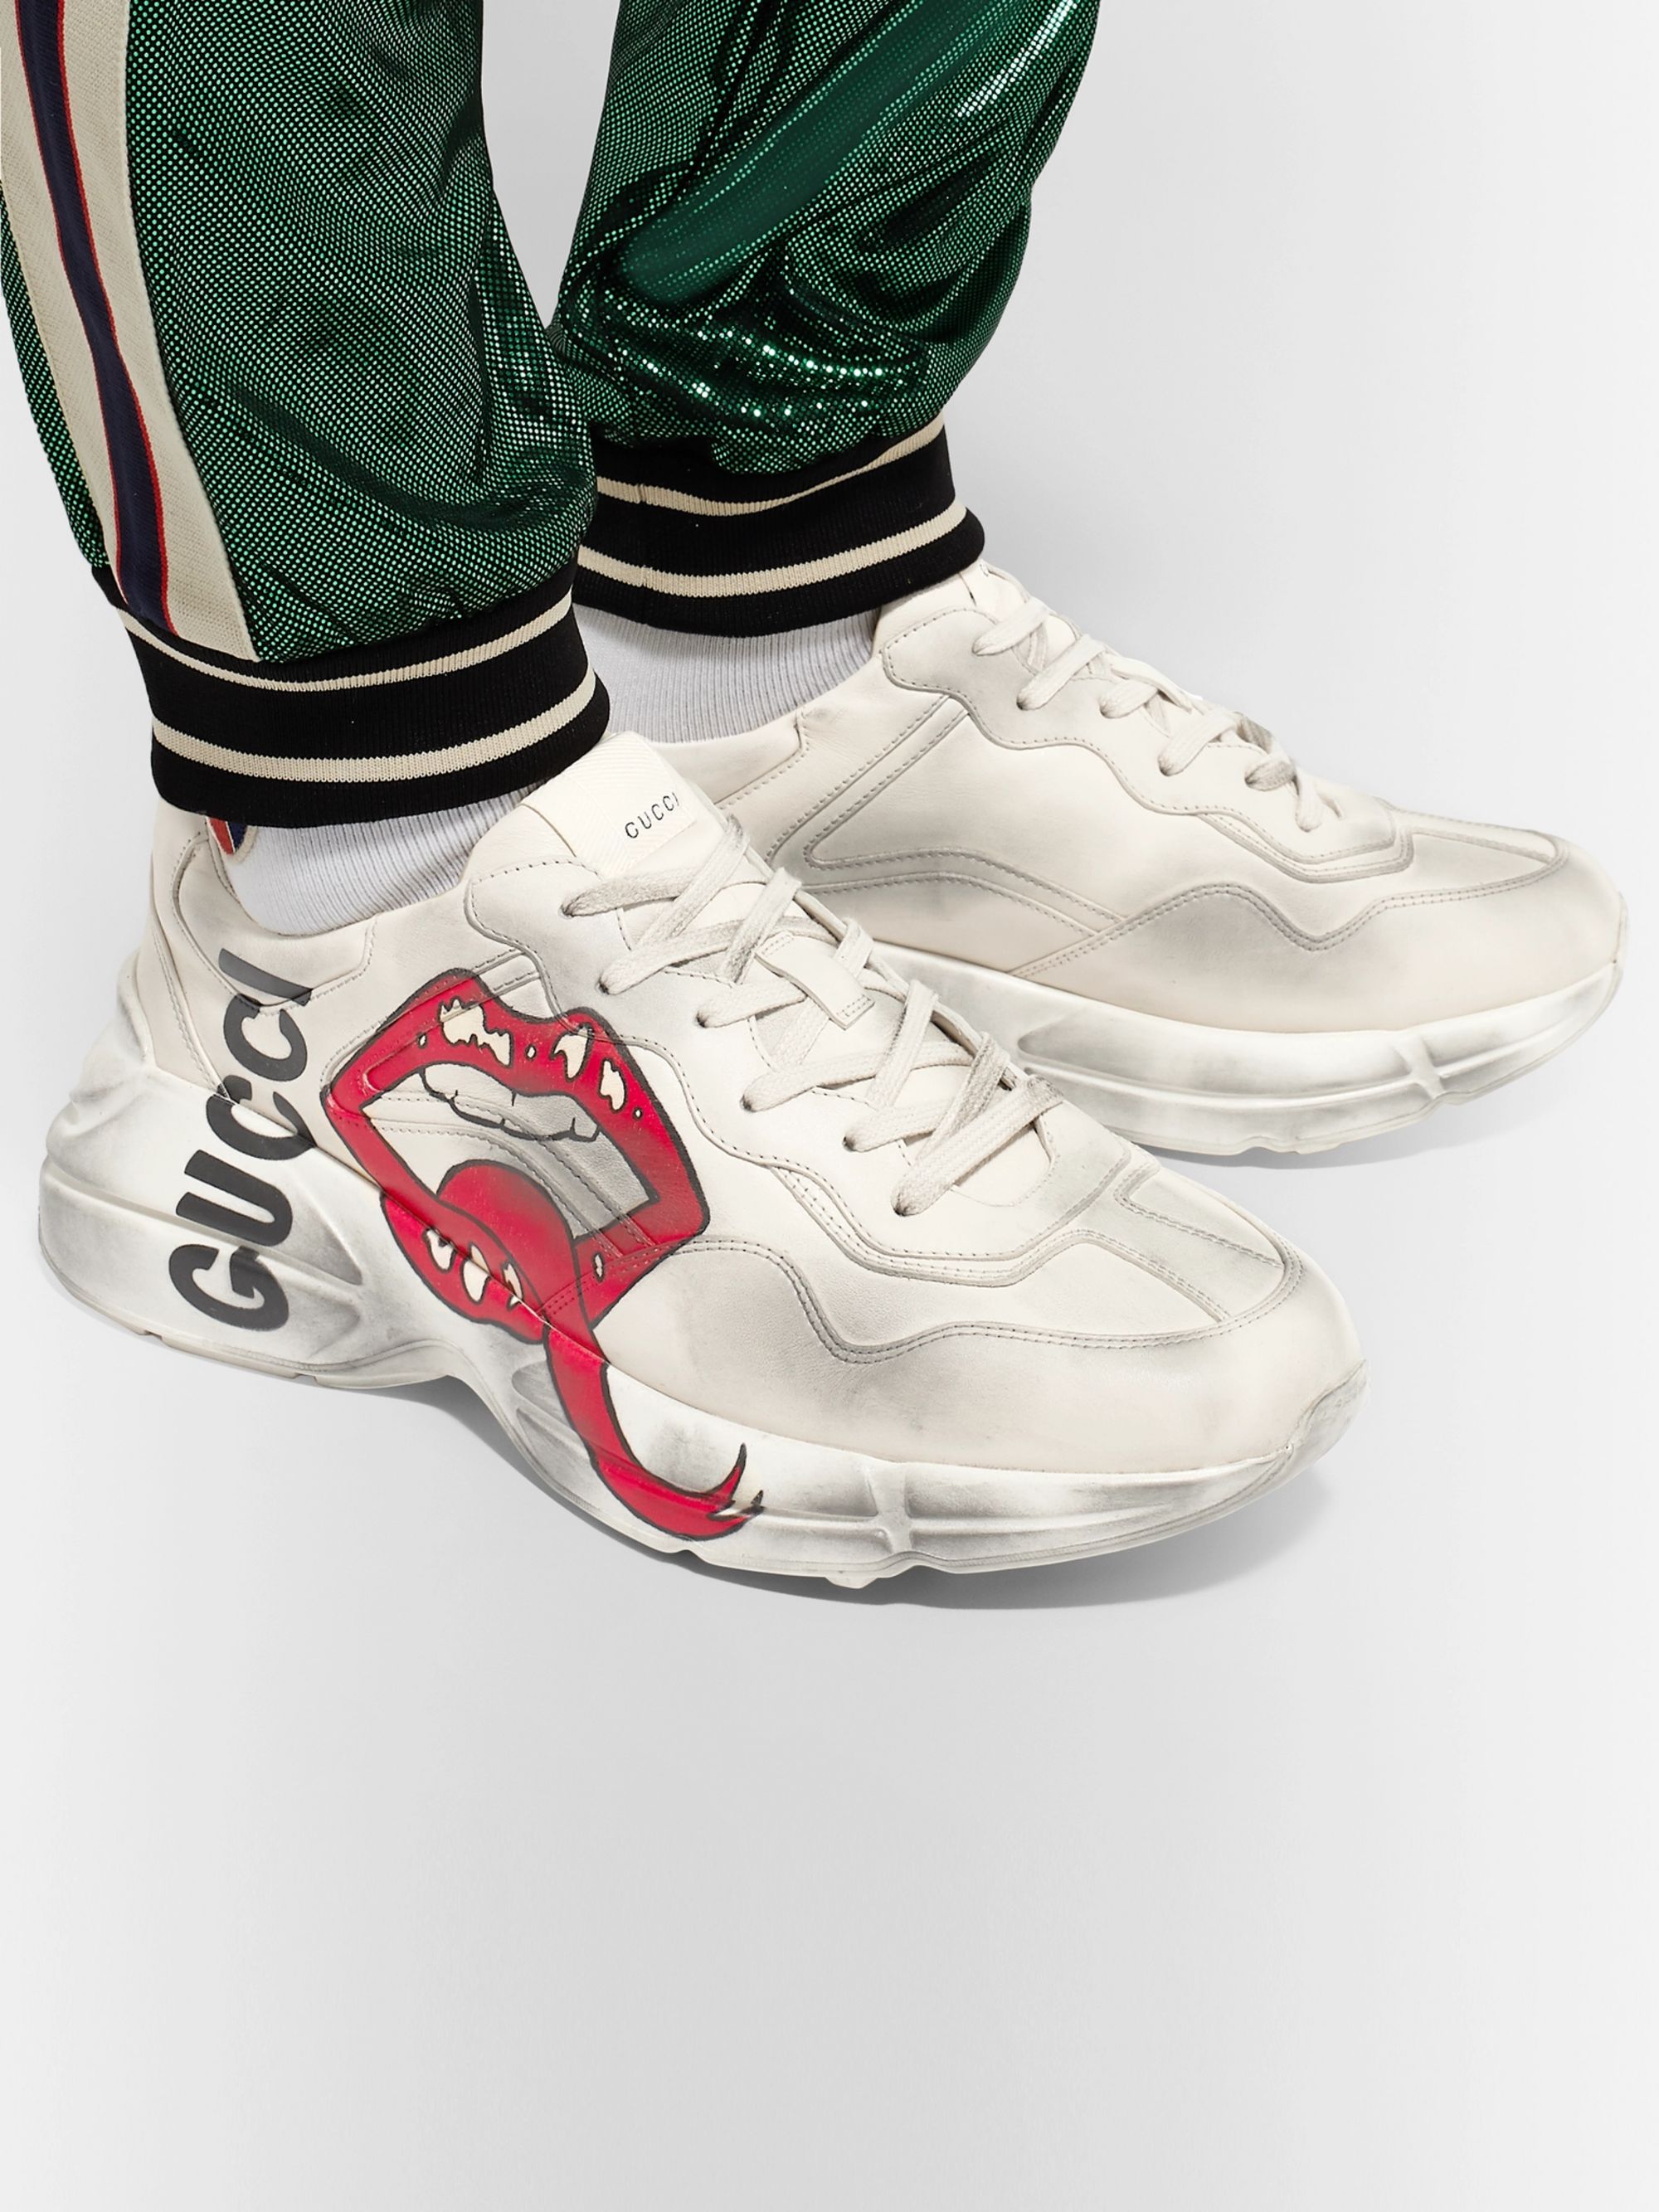 gucci shoes with kiss